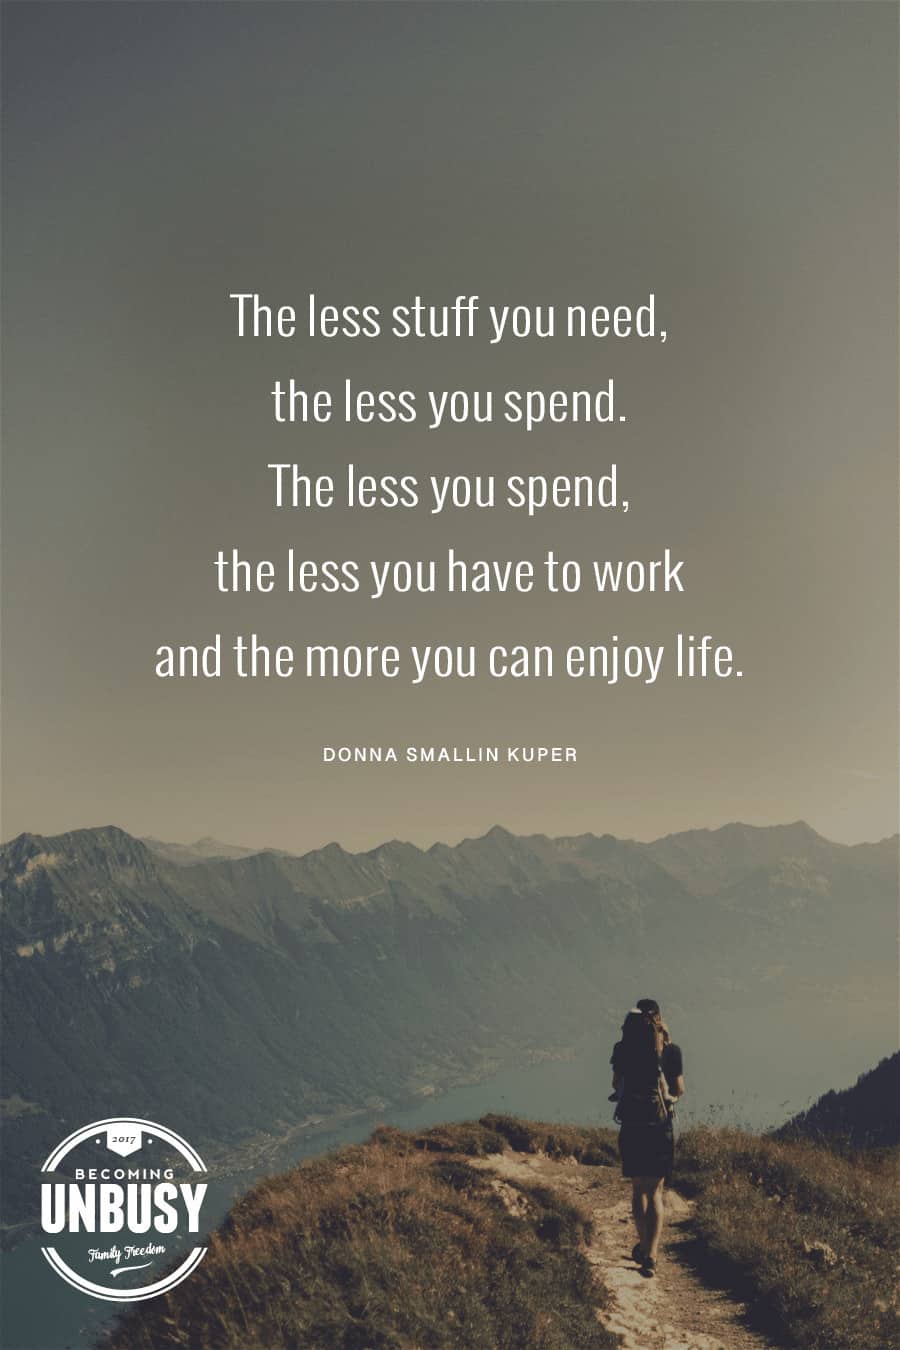 The less stuff you need, the less you spend. The less you spend, the less you have to work and the more you can enjoy life. #truth #quote #minimalism #livelife *Loving this whole post!